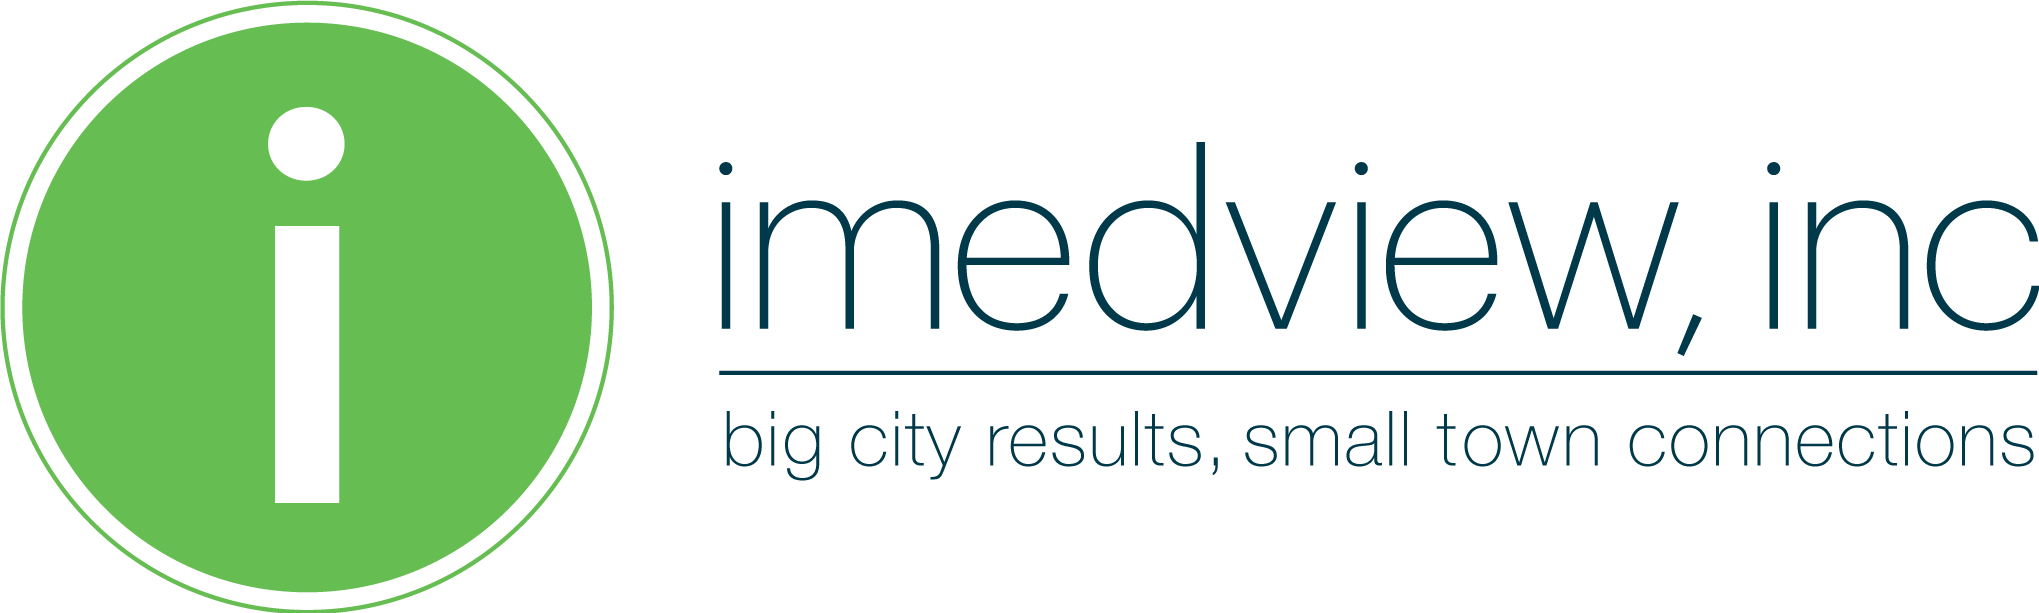 Imedview, inc big city results small town connections